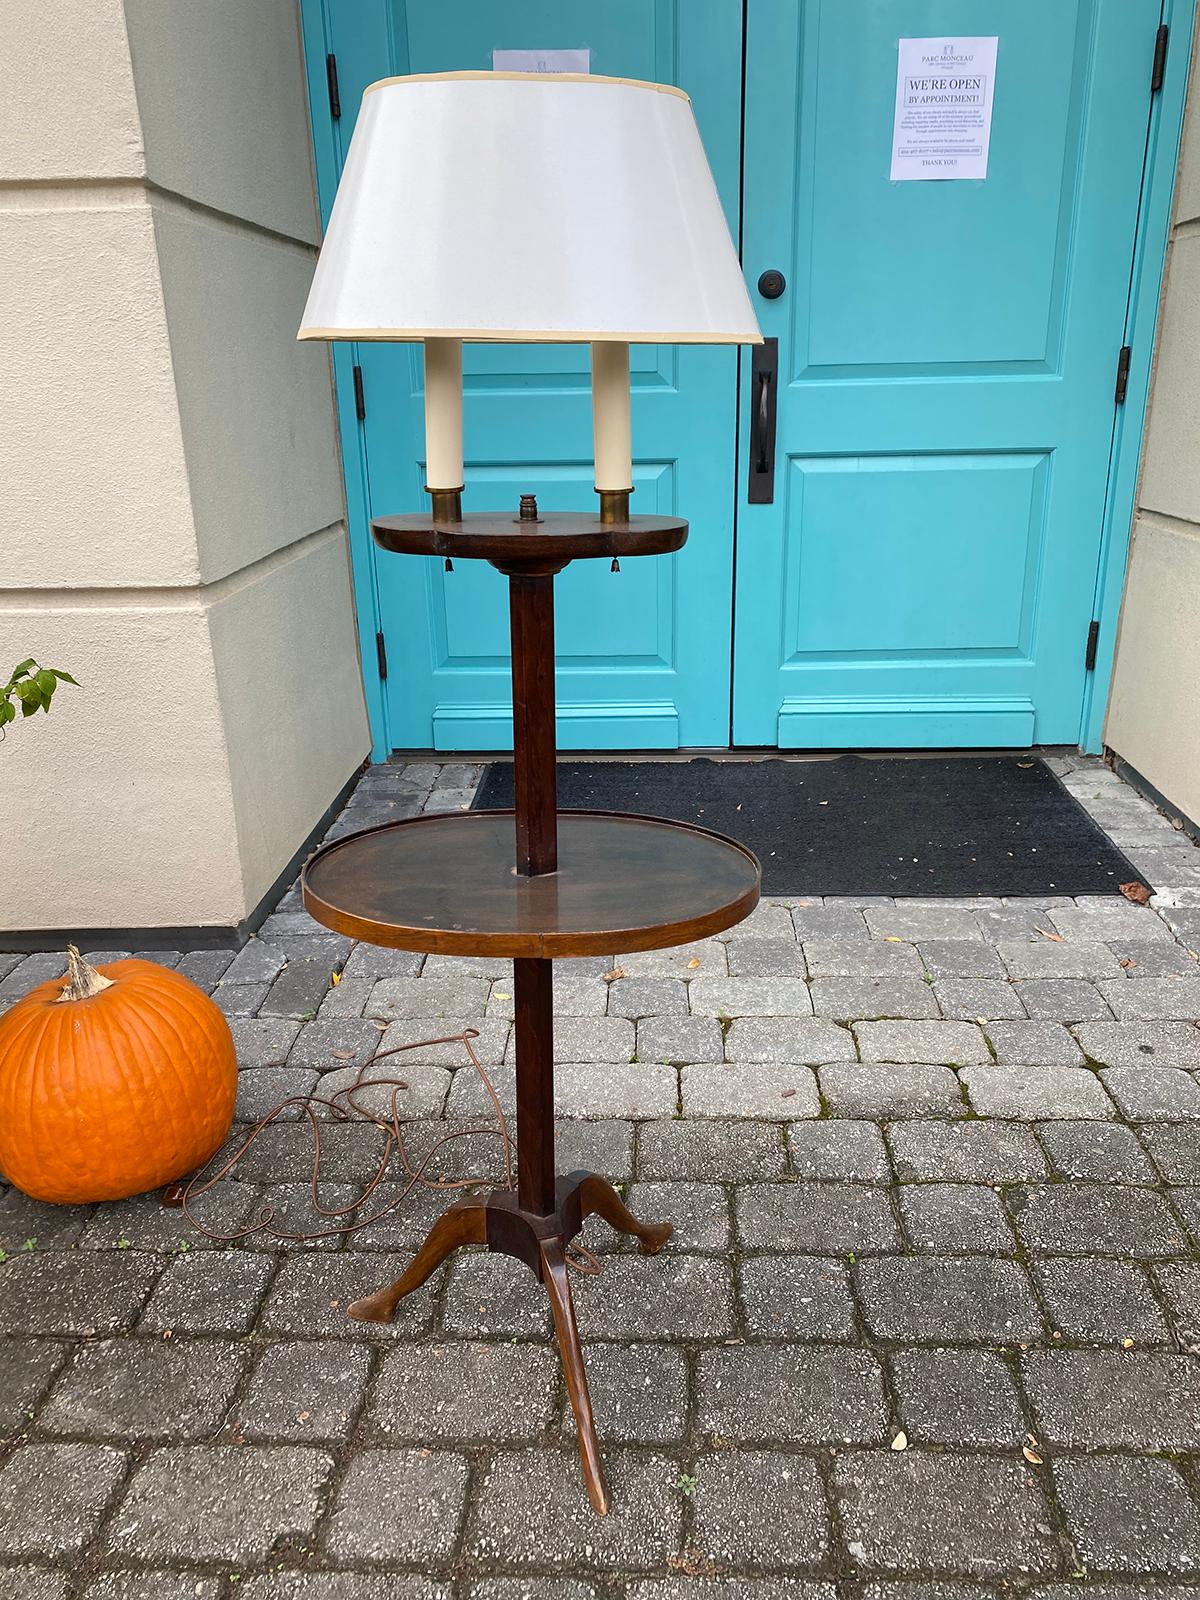 20th century French wooden floor lamp with table
New wiring
Measures: Table height 22.75